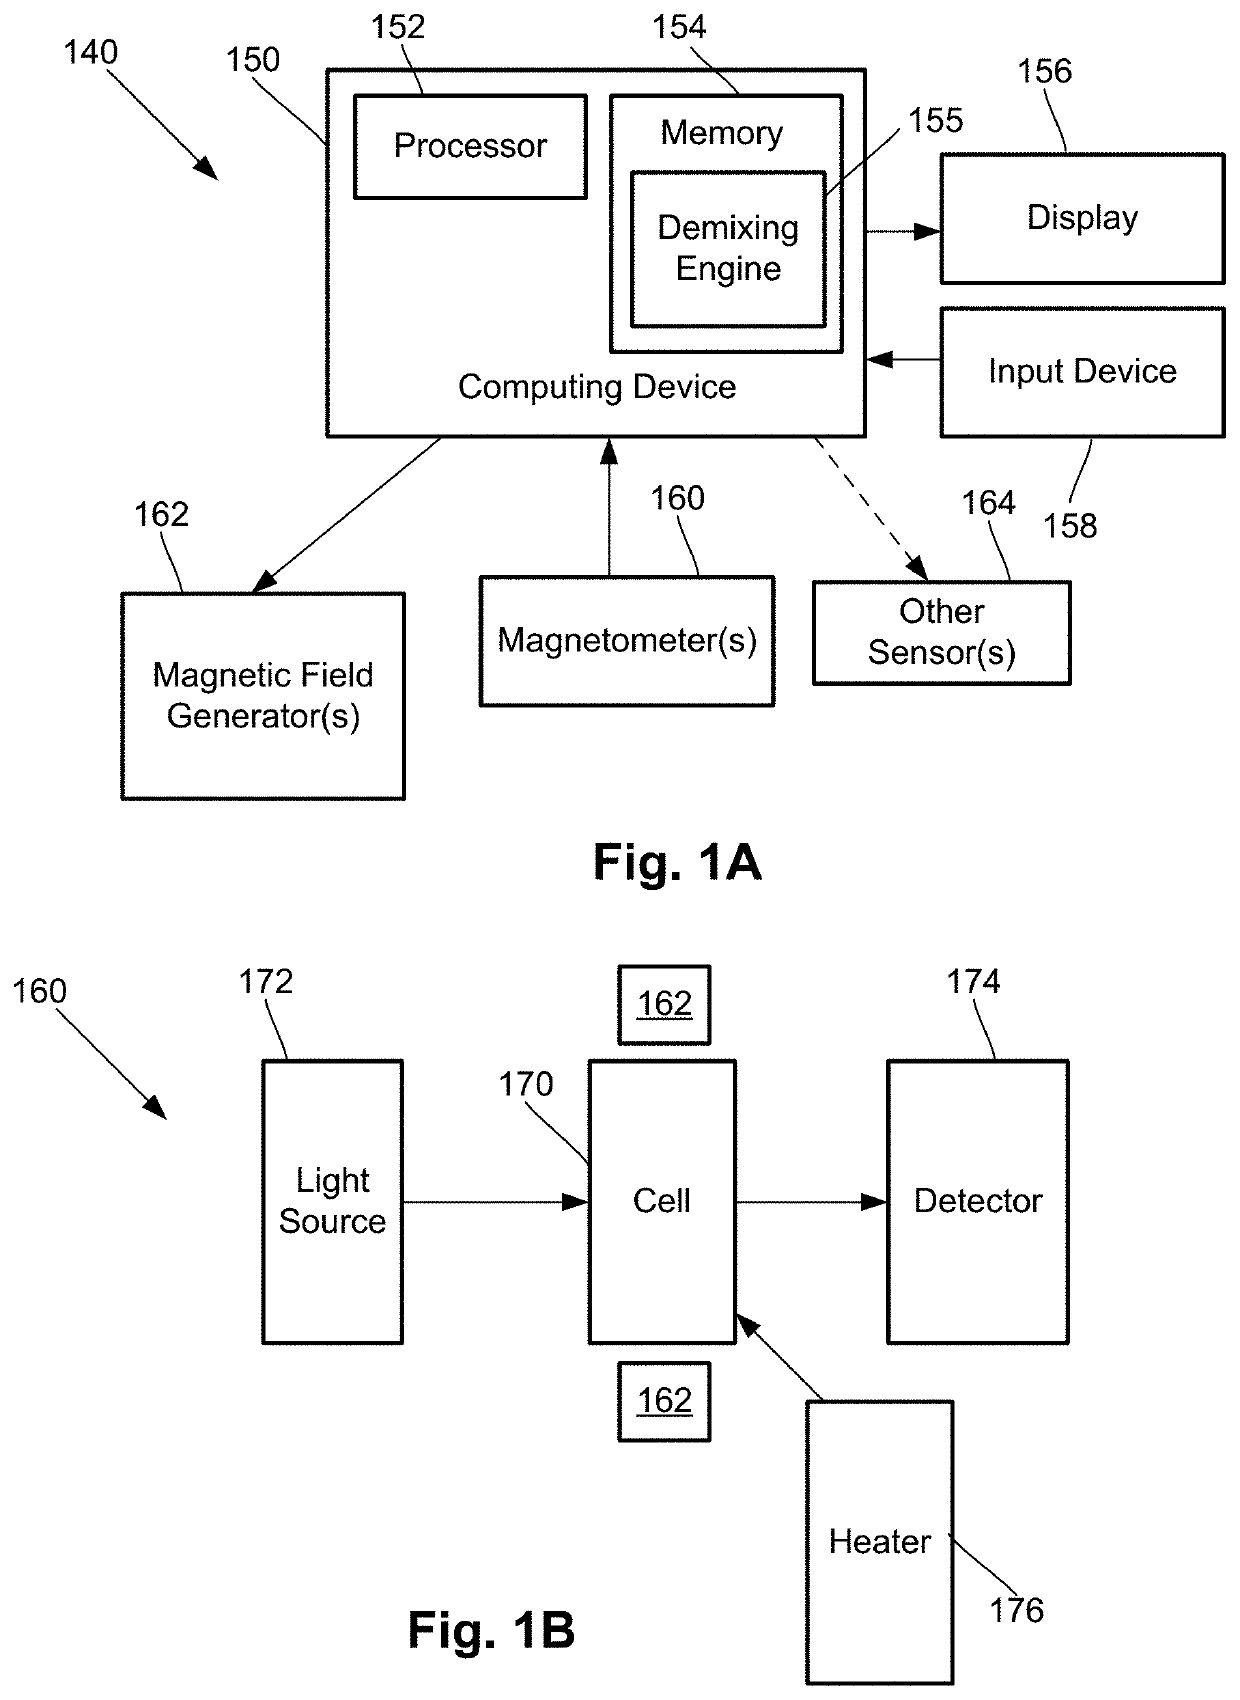 Systems and methods for suppression of interferences in magnetoencephalography (MEG) and other magnetometer measurements